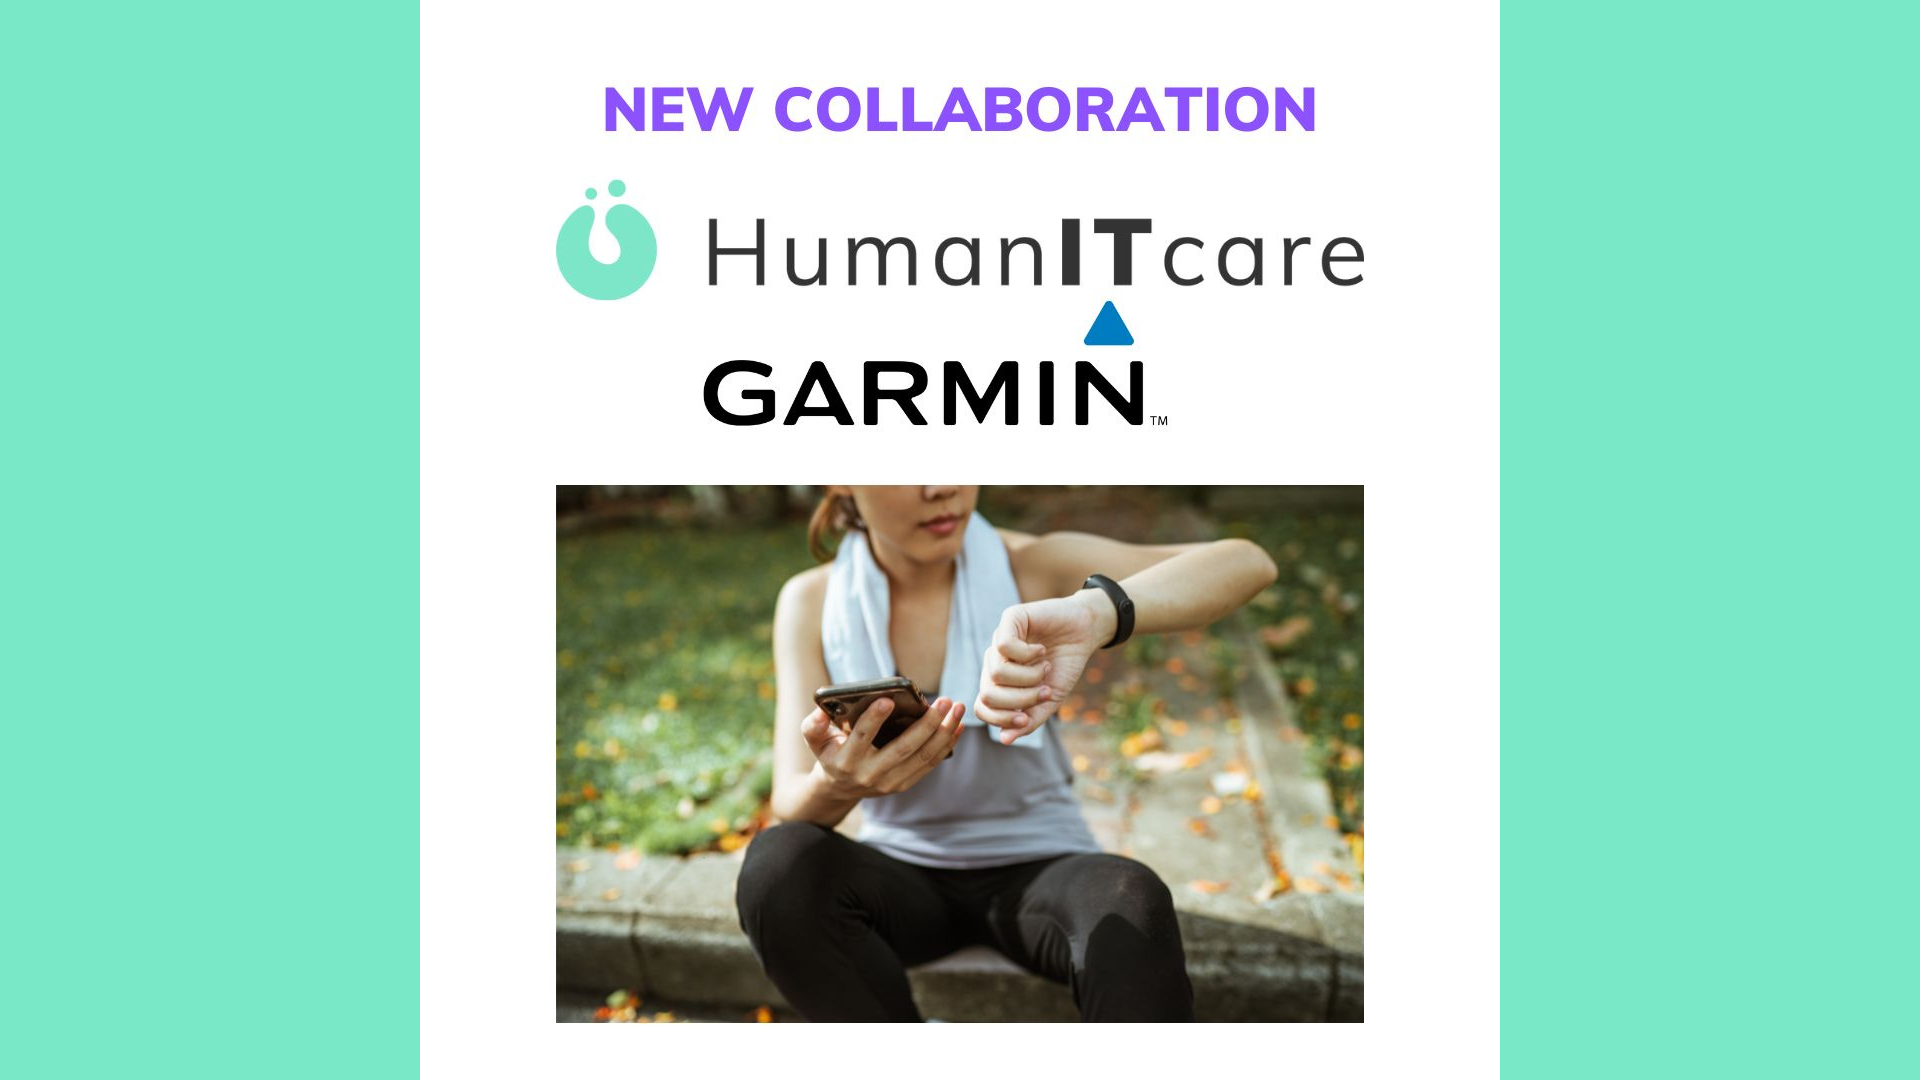 HumanITcare collaborates with Garmin to provide expanded access to connected health - #BHHMembersInitiatives